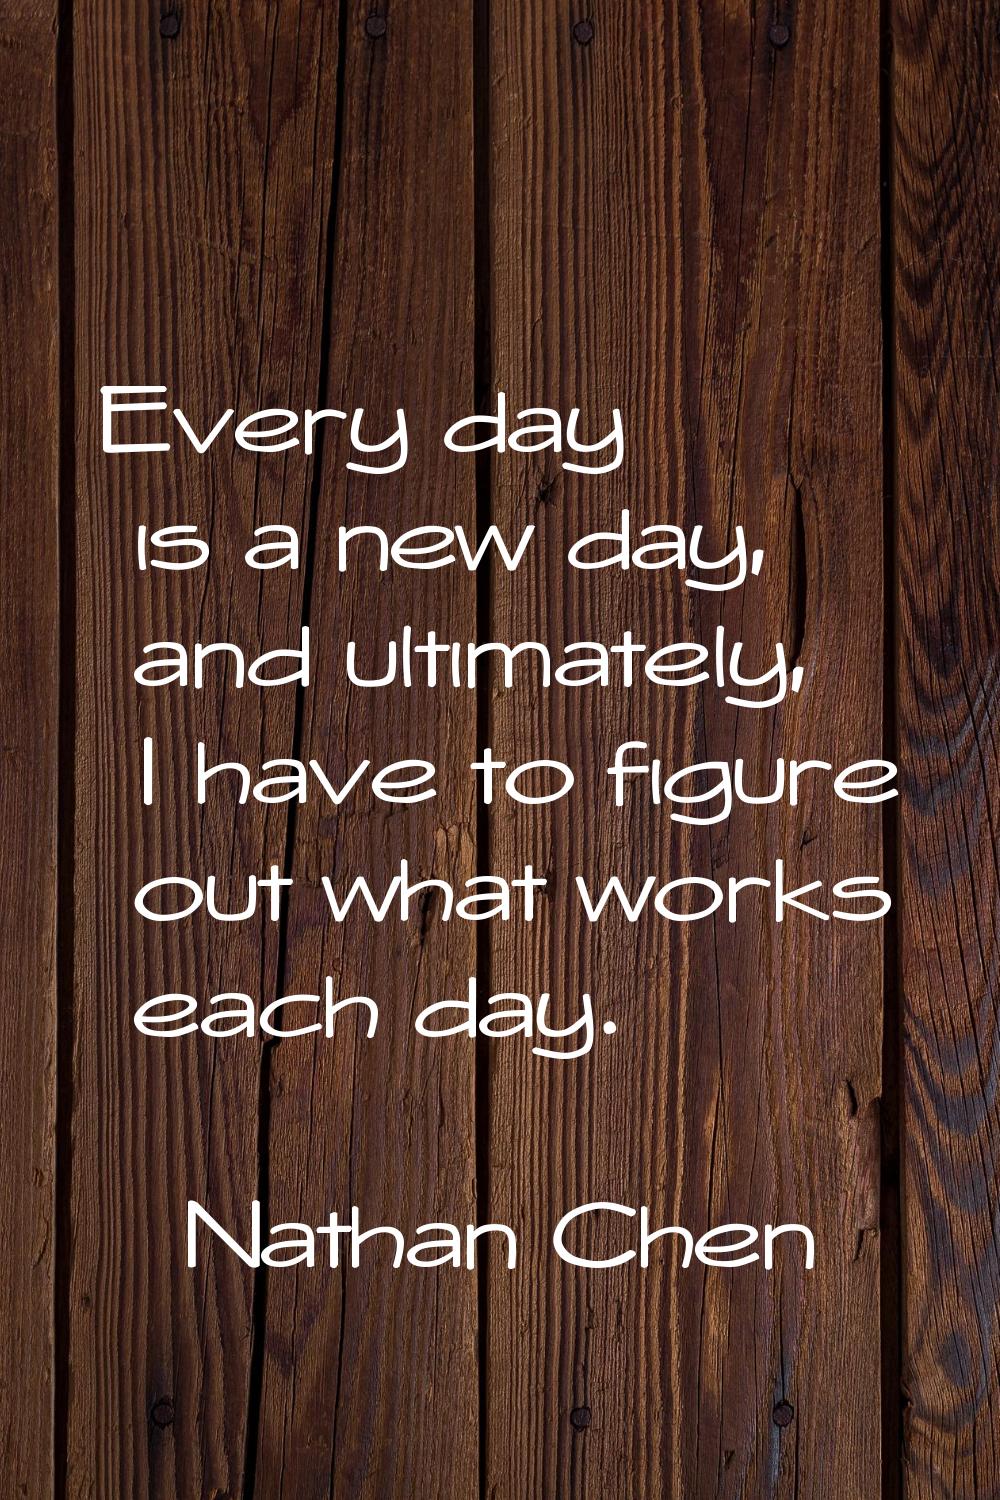 Every day is a new day, and ultimately, I have to figure out what works each day.